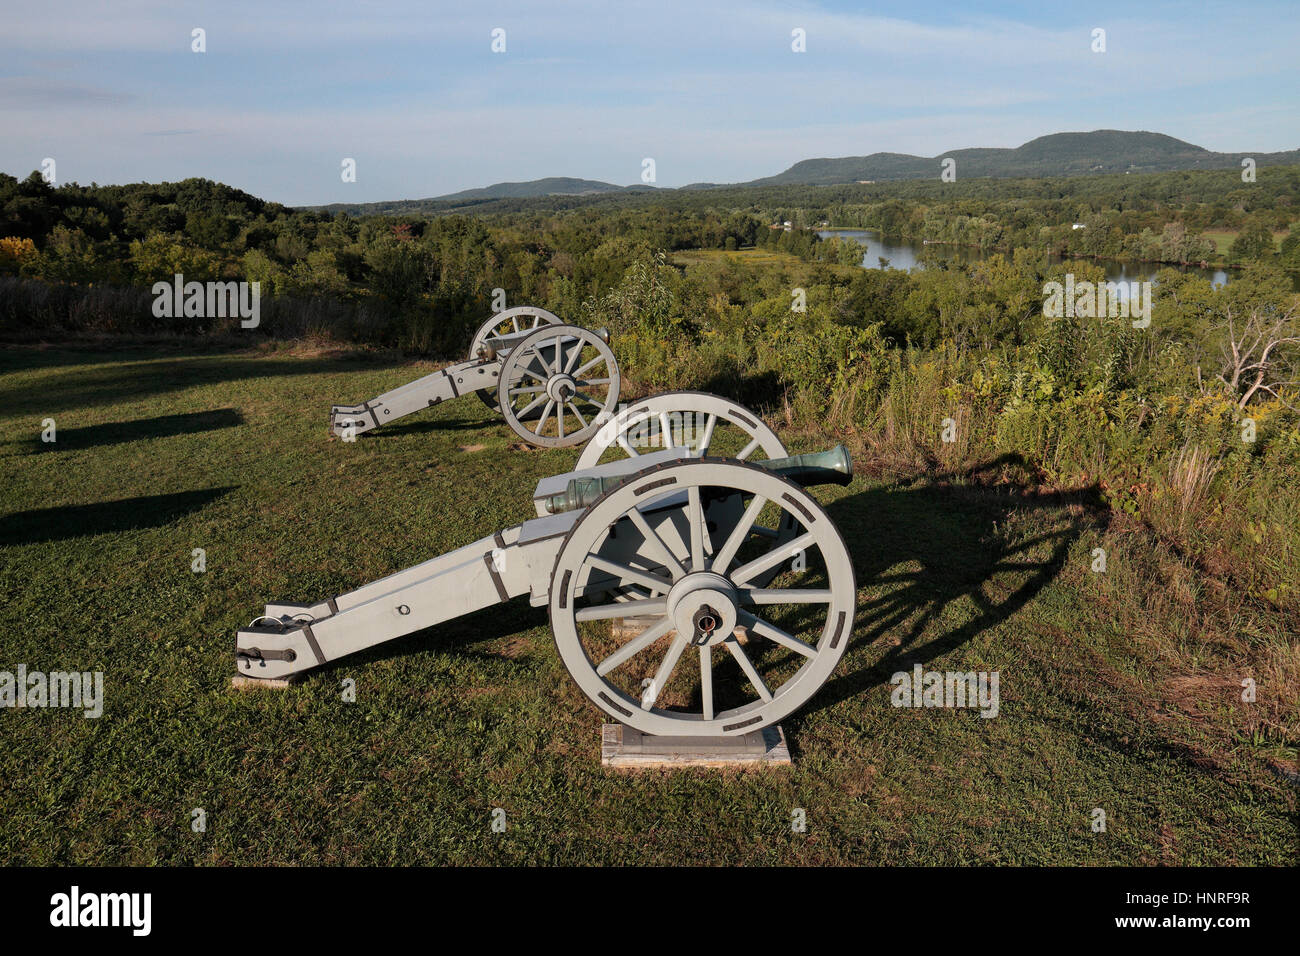 Artillery at the Great Redoubt (overlooking the Hudson River), Saratoga National Historical Park, Stillwater, New York, United States. Stock Photo